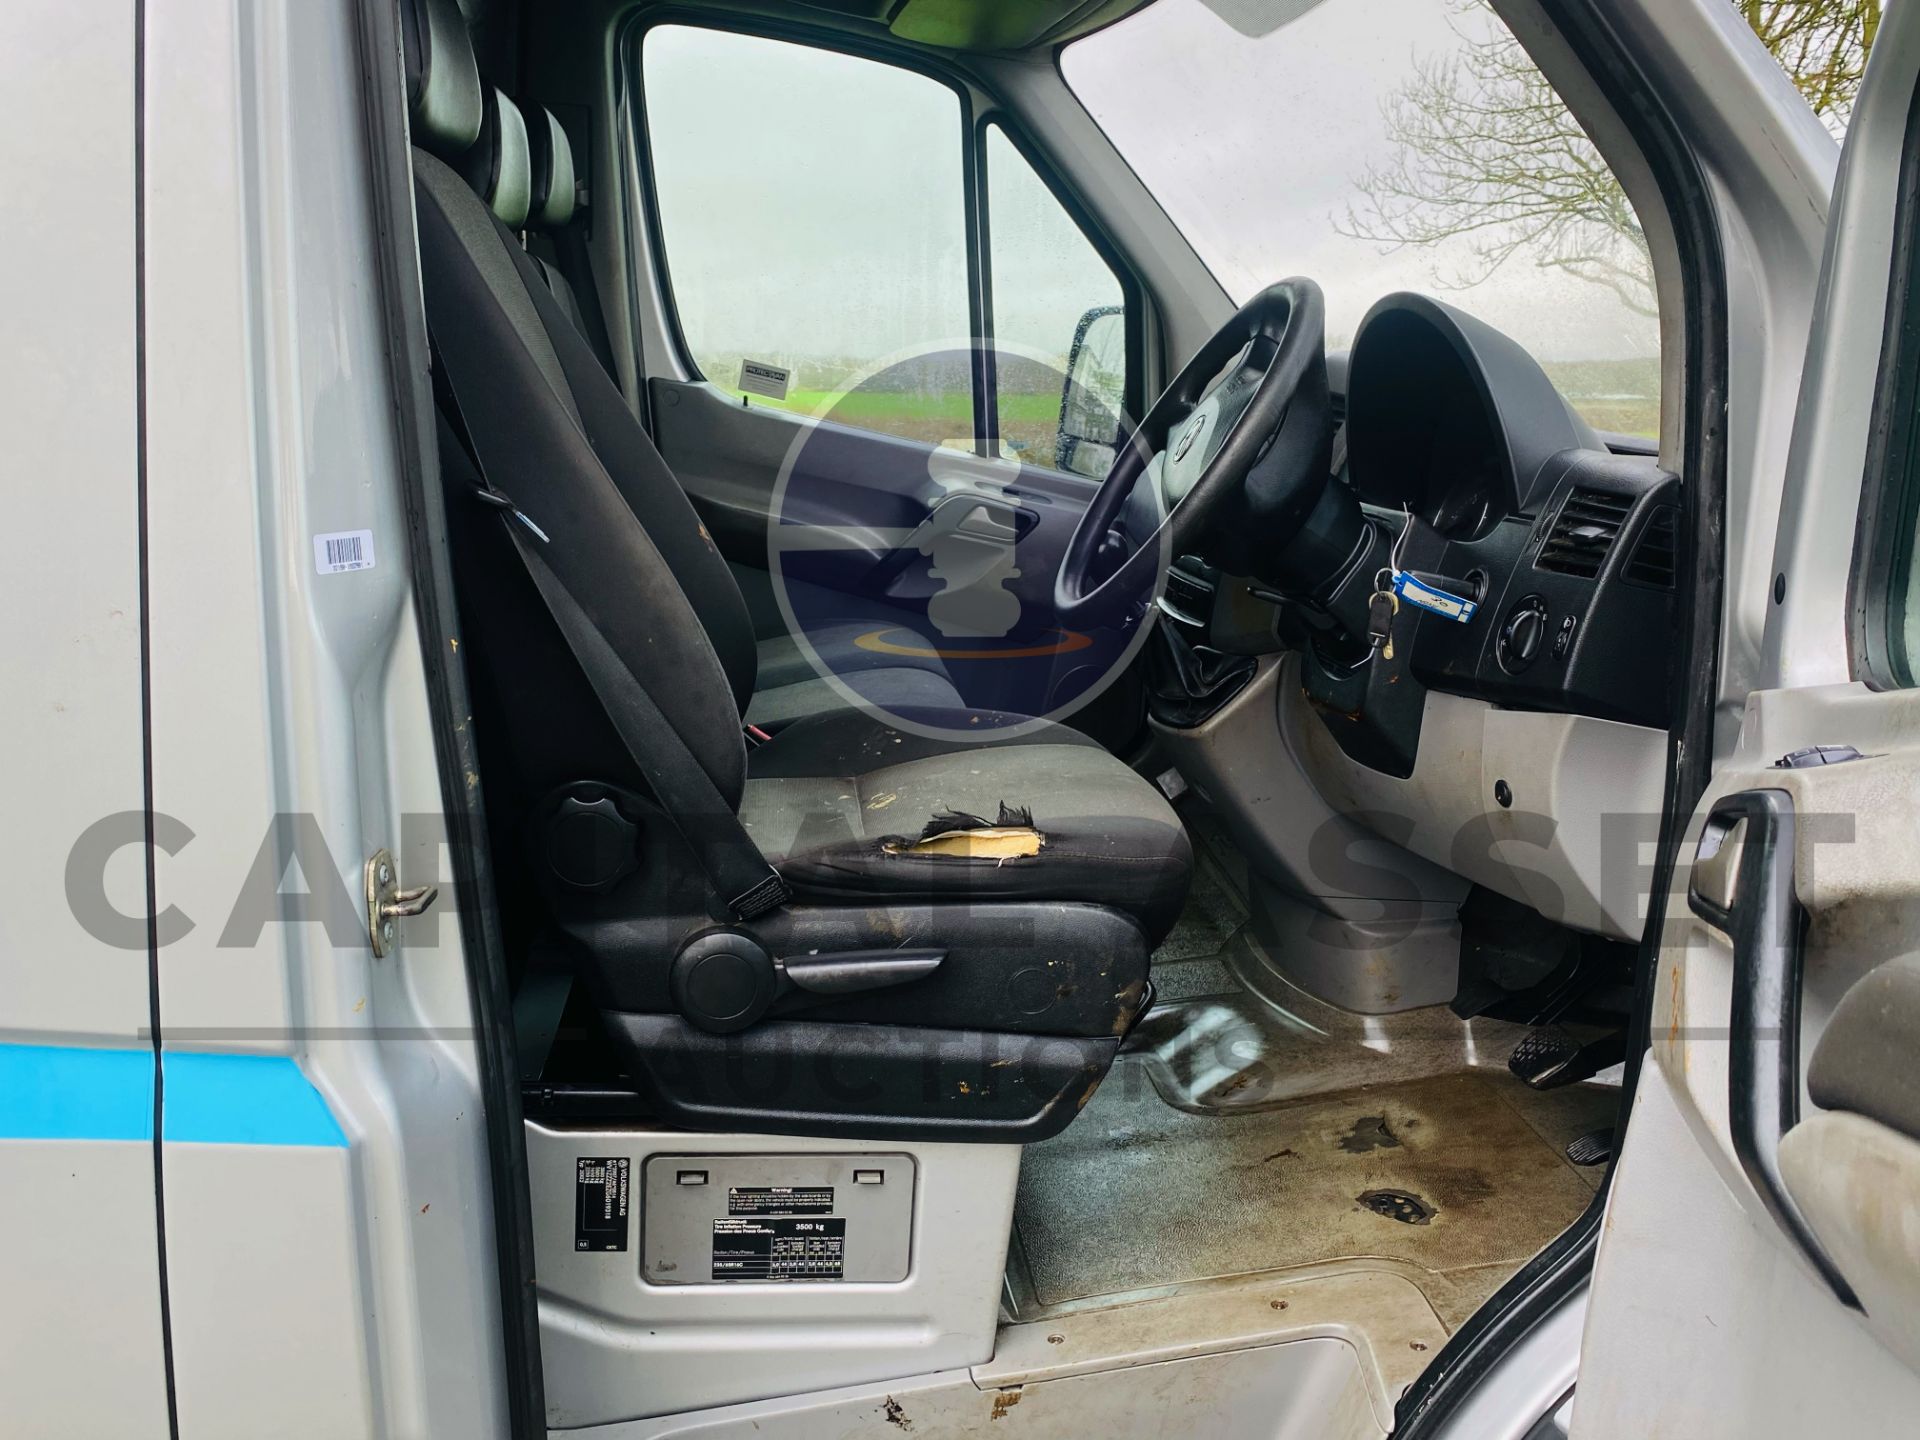 (ON SALE / RESERVE MET) VOLKSWAGON CRAFTER 2.0 TDI LONG WHEEL BASE AIR CONDITIONING-LONG WHEEL BASE - Image 11 of 16